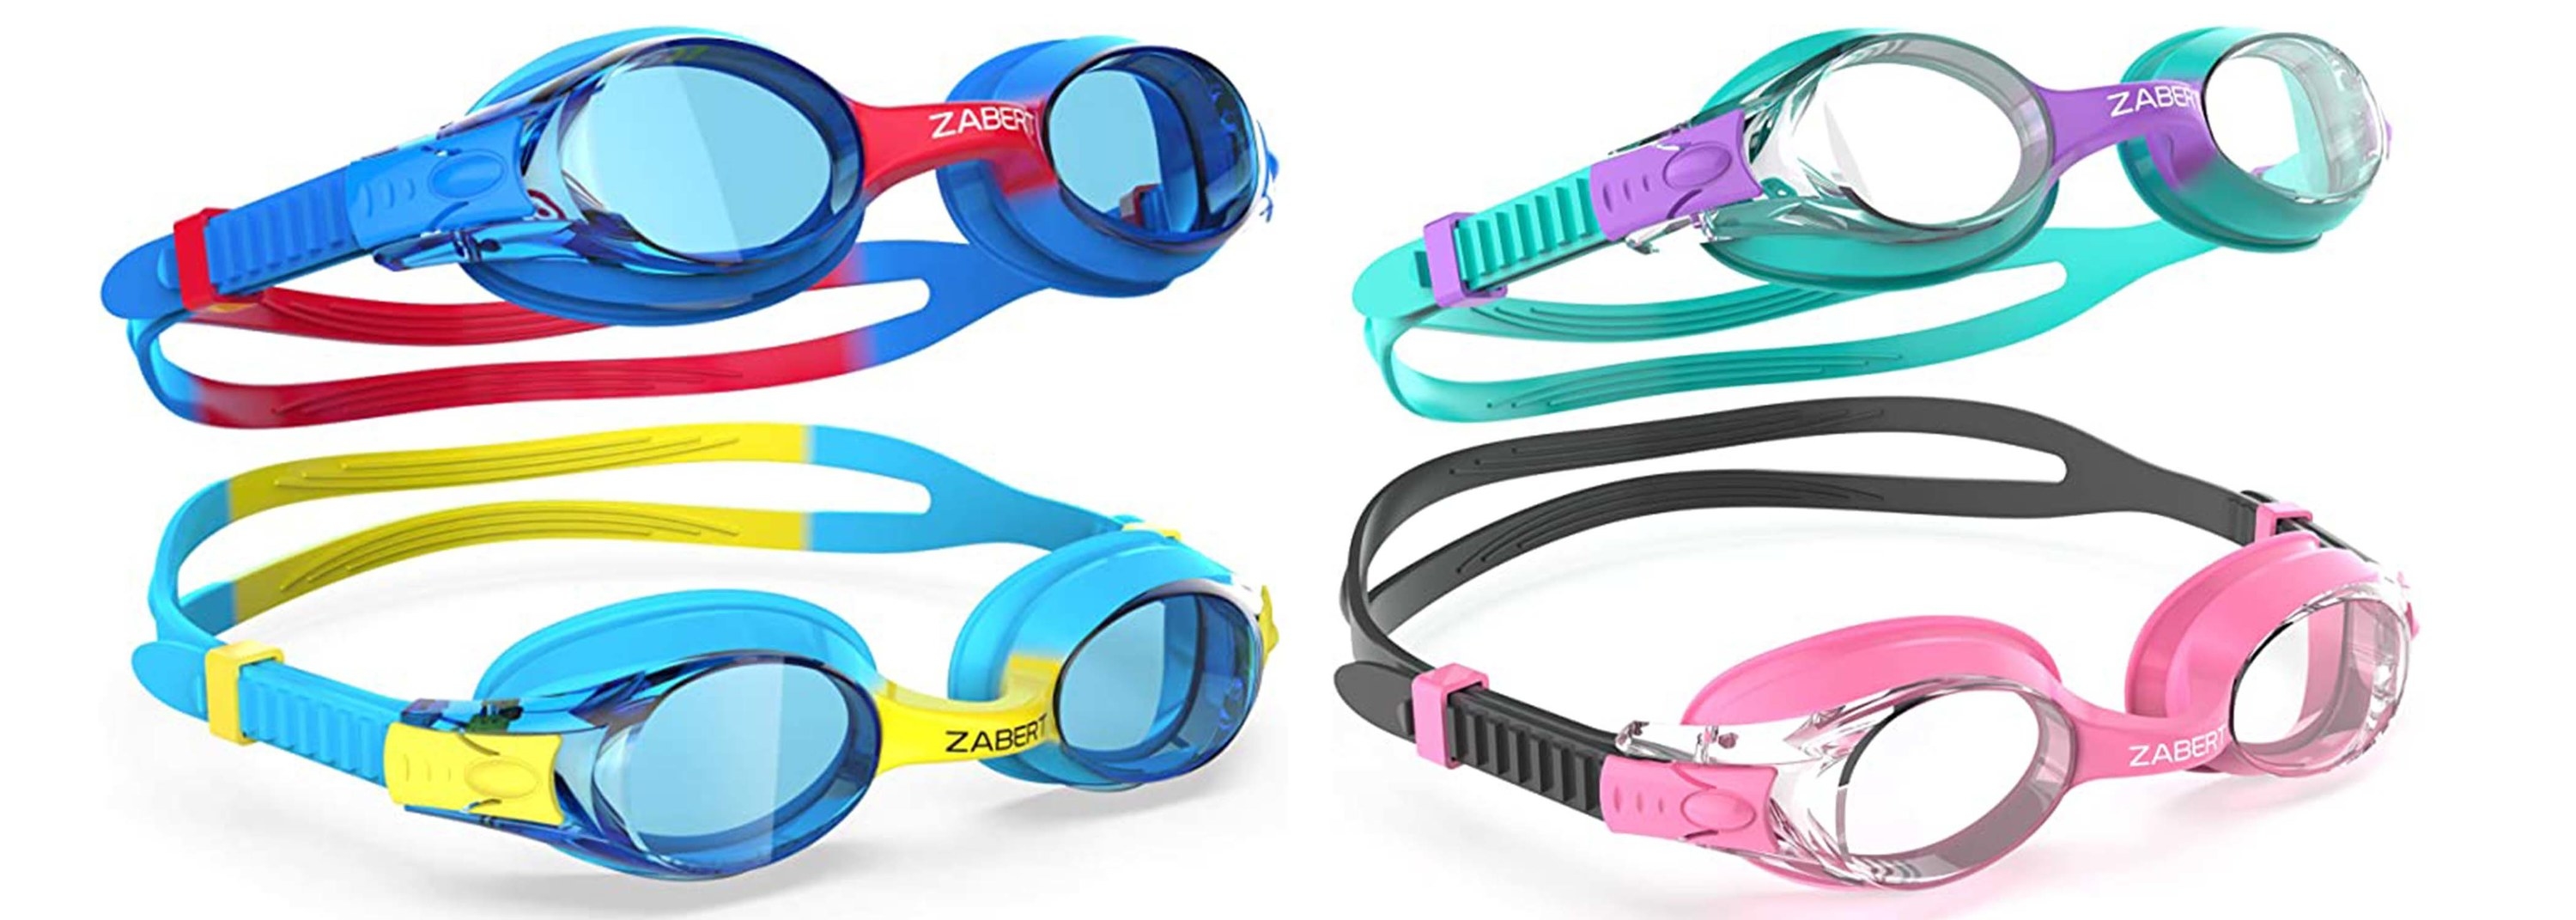 Four images of different dual-colored swimming goggles